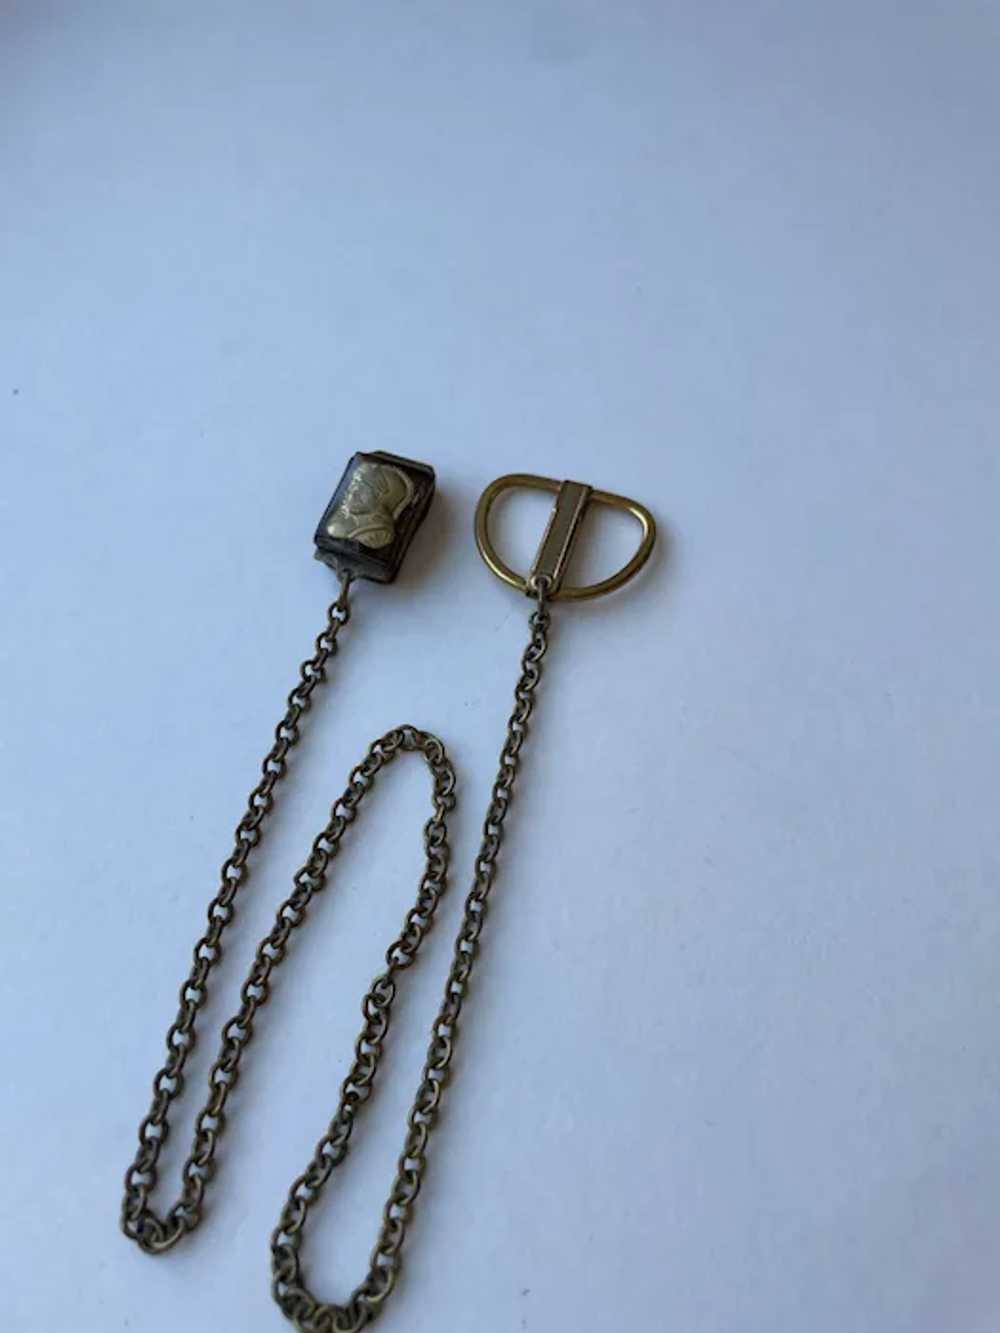 Antique 10K Gold Filled Watch Fob and Chain - image 4